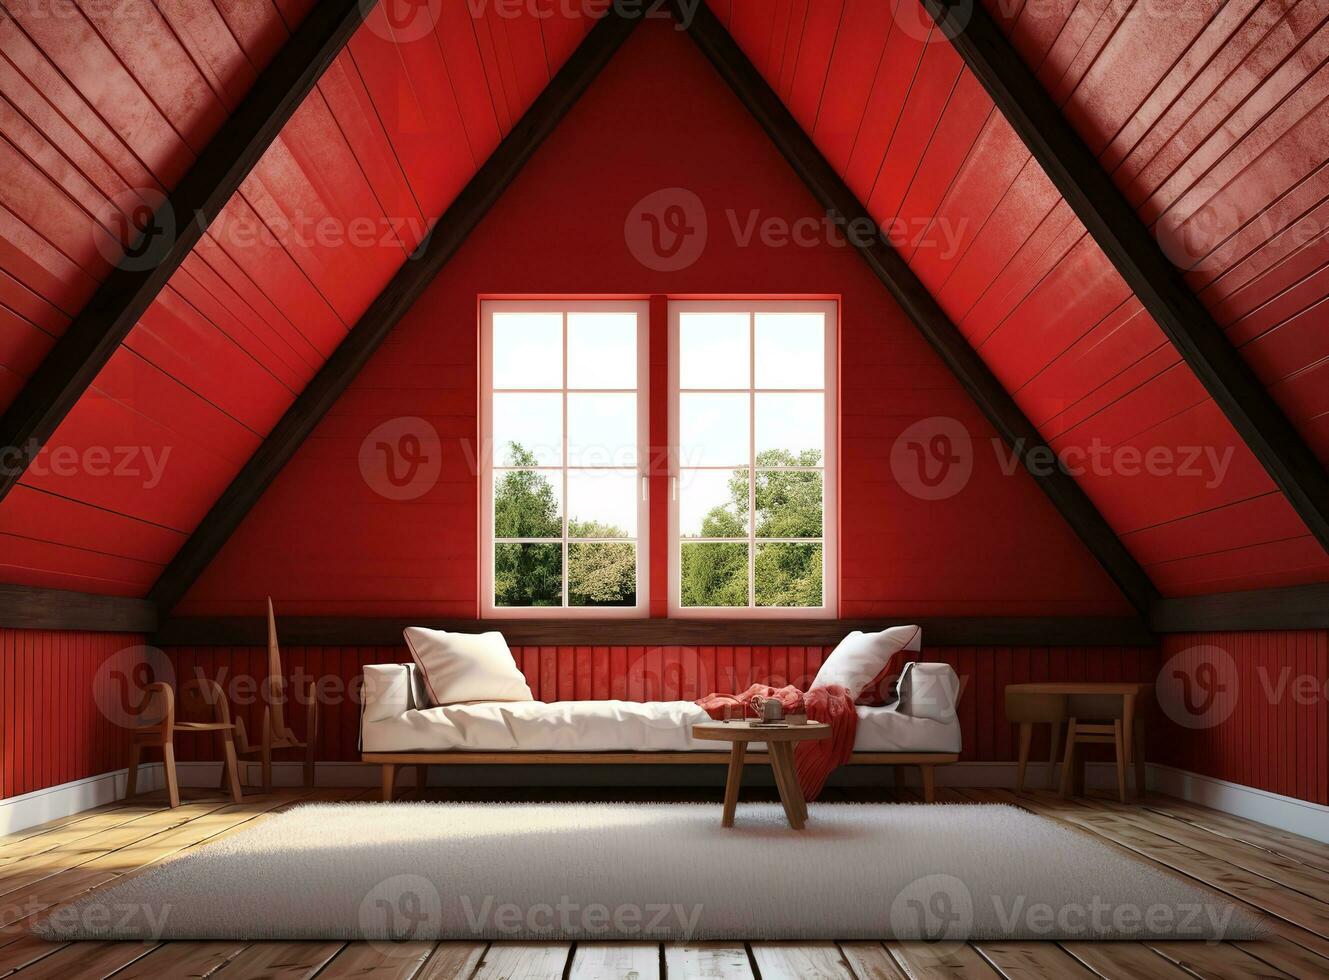 AI generated a 3D rendering of a cozy attic living room with a red wooden ceiling and walls. The room has a white sofa, wooden coffee table, and two wooden chairs. The window has a view of trees photo